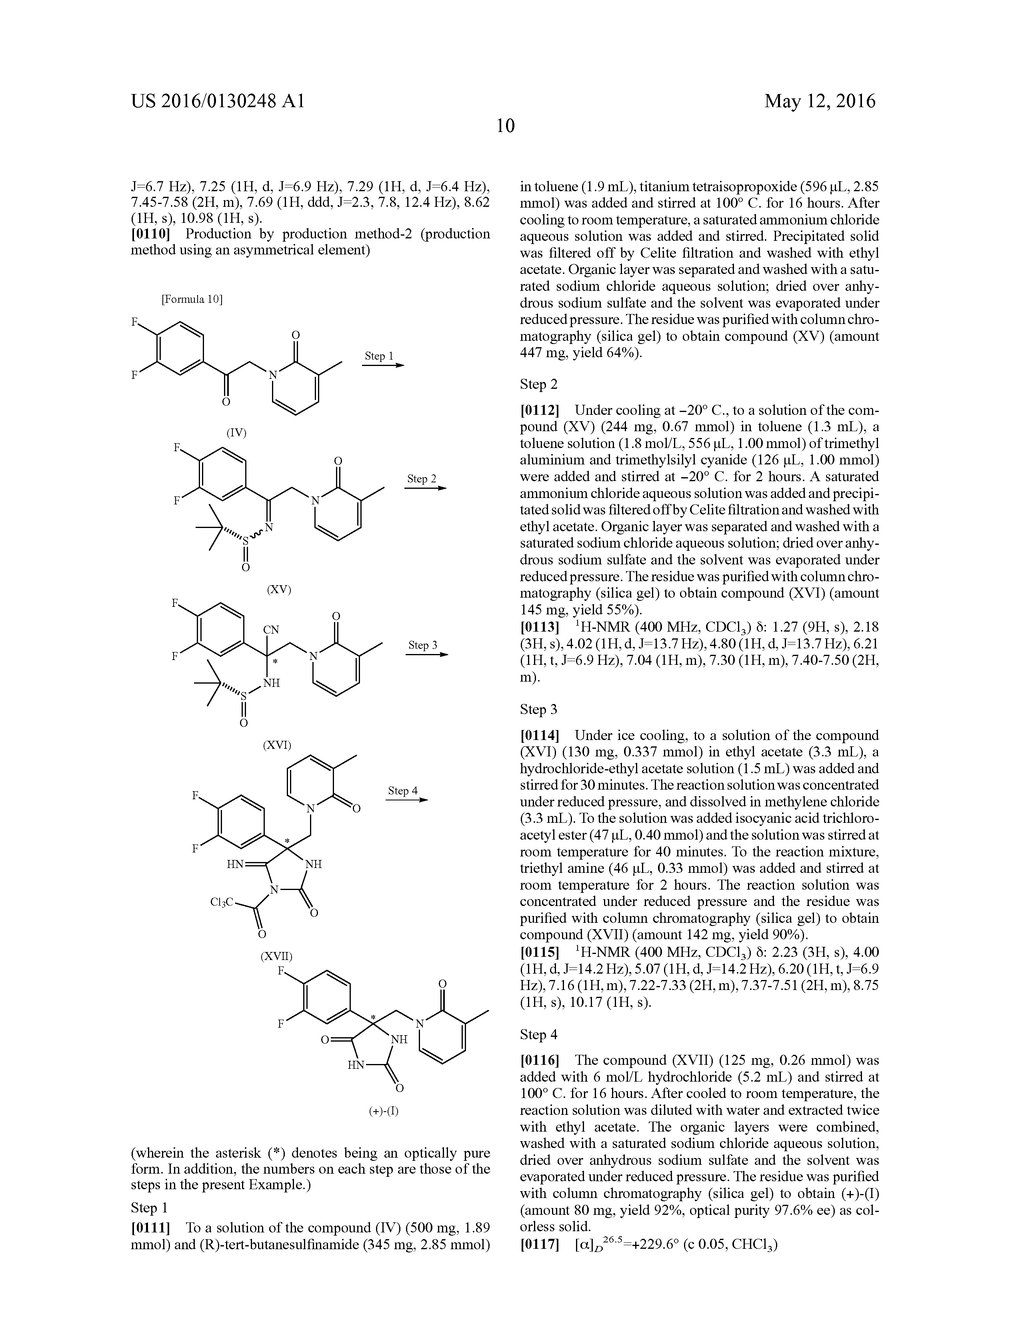 (+)-5-(3,4-DIFLUOROPHENYL)-5-[(3-METHYL-2-OXOPYRIDIN-1(2H)-YL)METHYL]IMIDA-    ZOLIDINE-2,4-DIONE AND DRUG CONTAINING SAME - diagram, schematic, and image 11